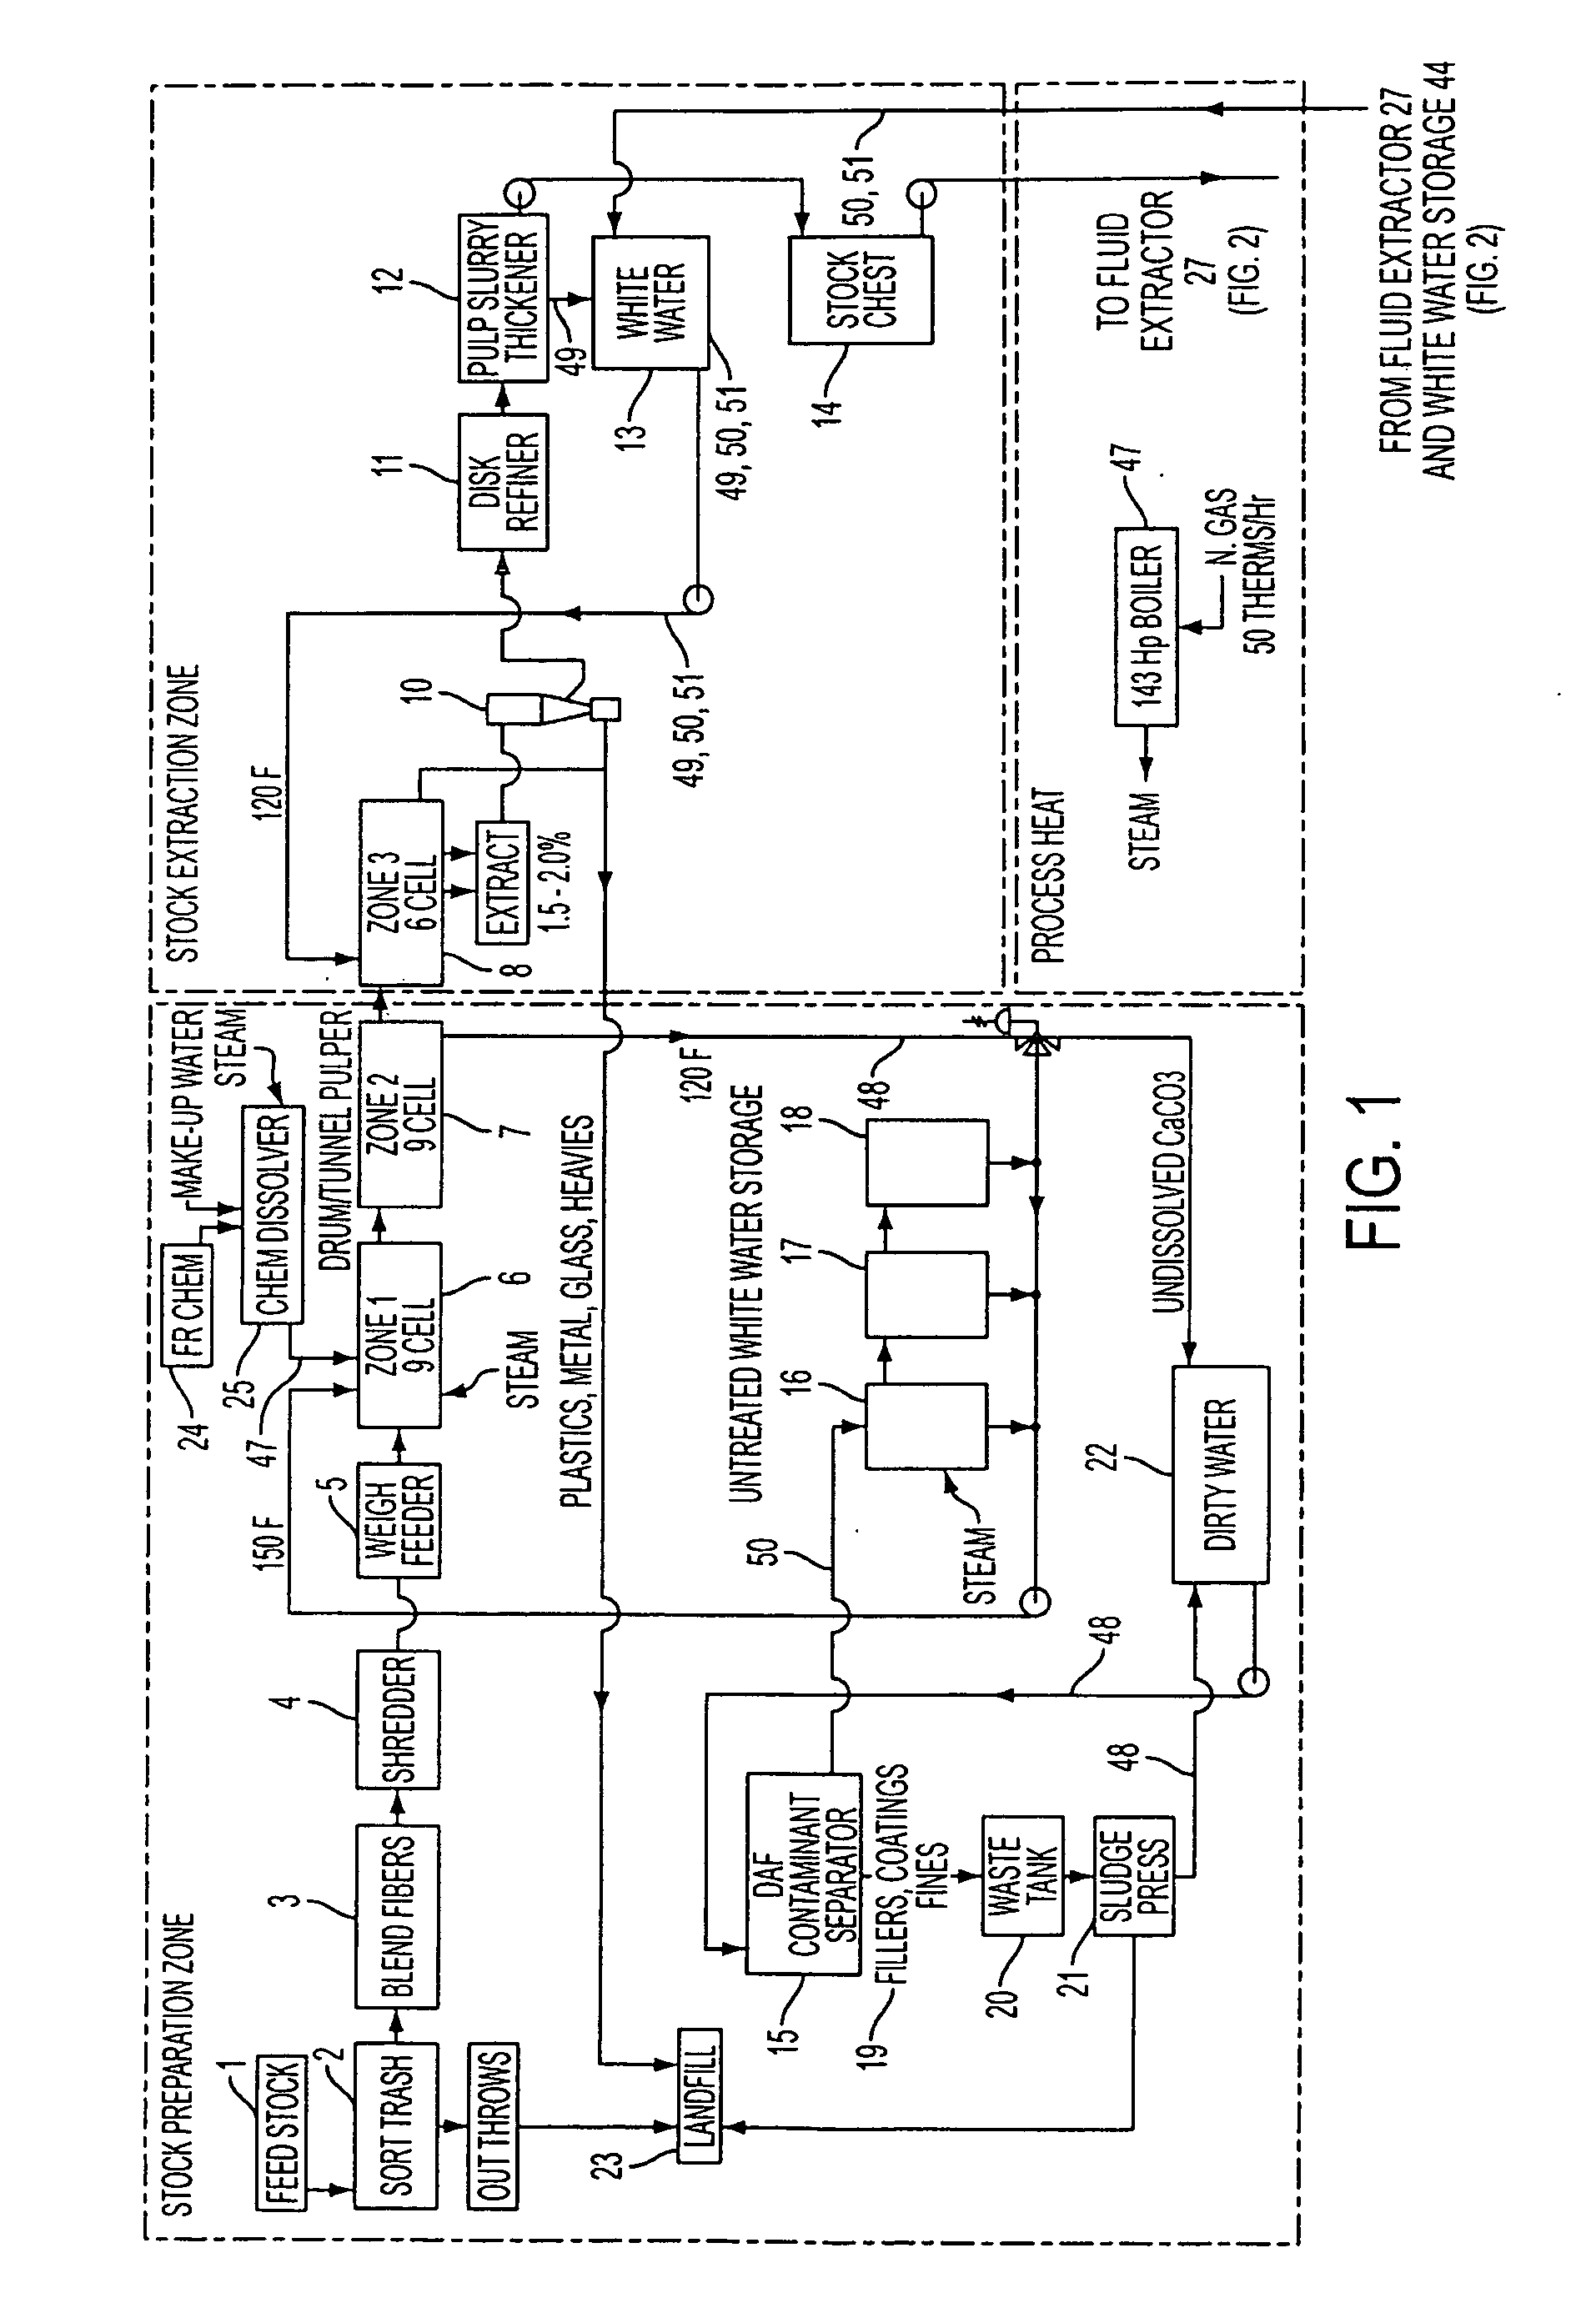 Wet pulping system and method for producing cellulosic insulation with low ash content